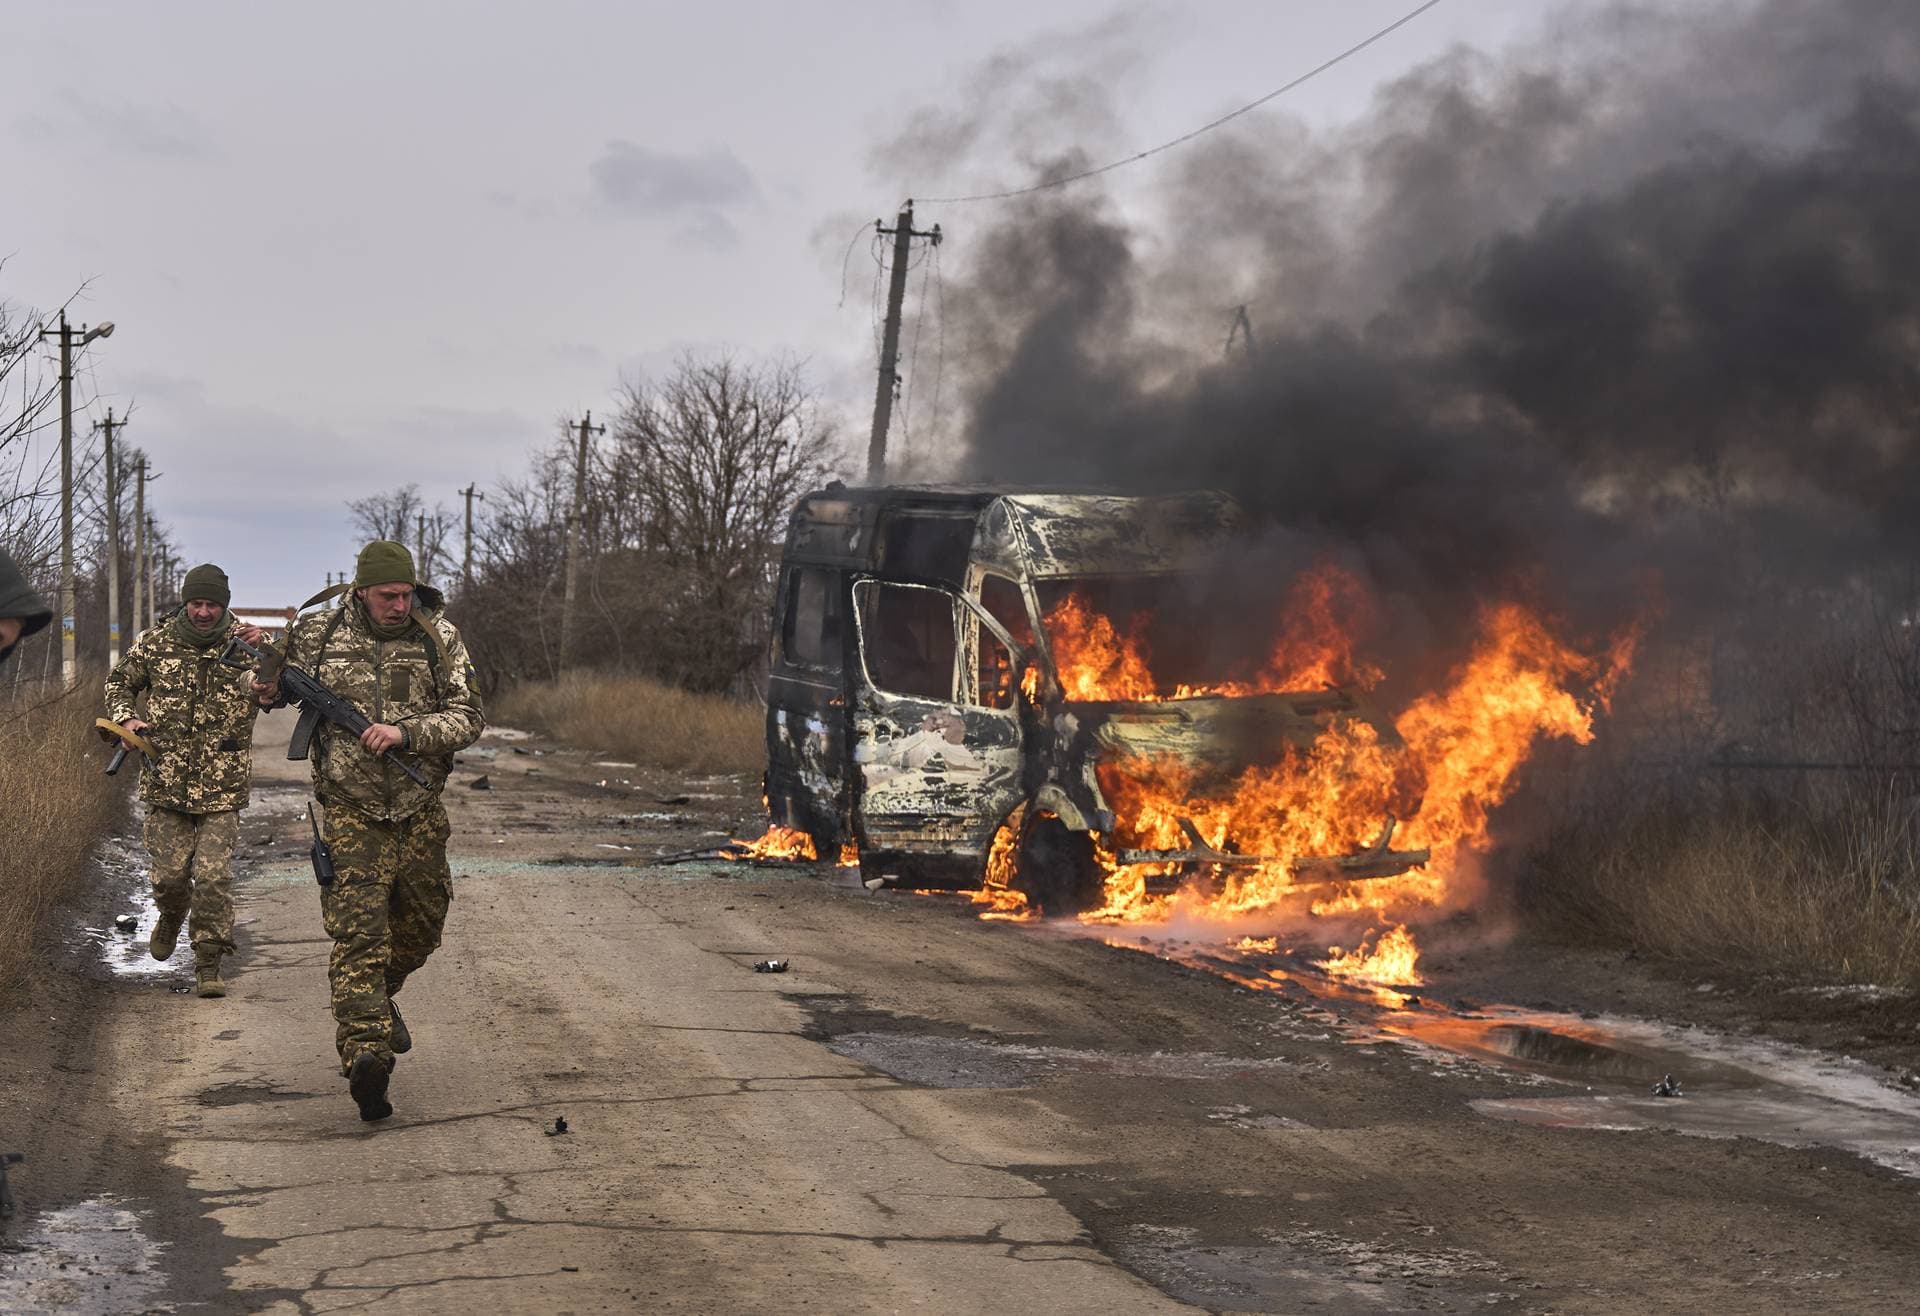 Ukrainian soldiers pass by a volunteer bus burning after a Russian drone hit it near Bakhmut